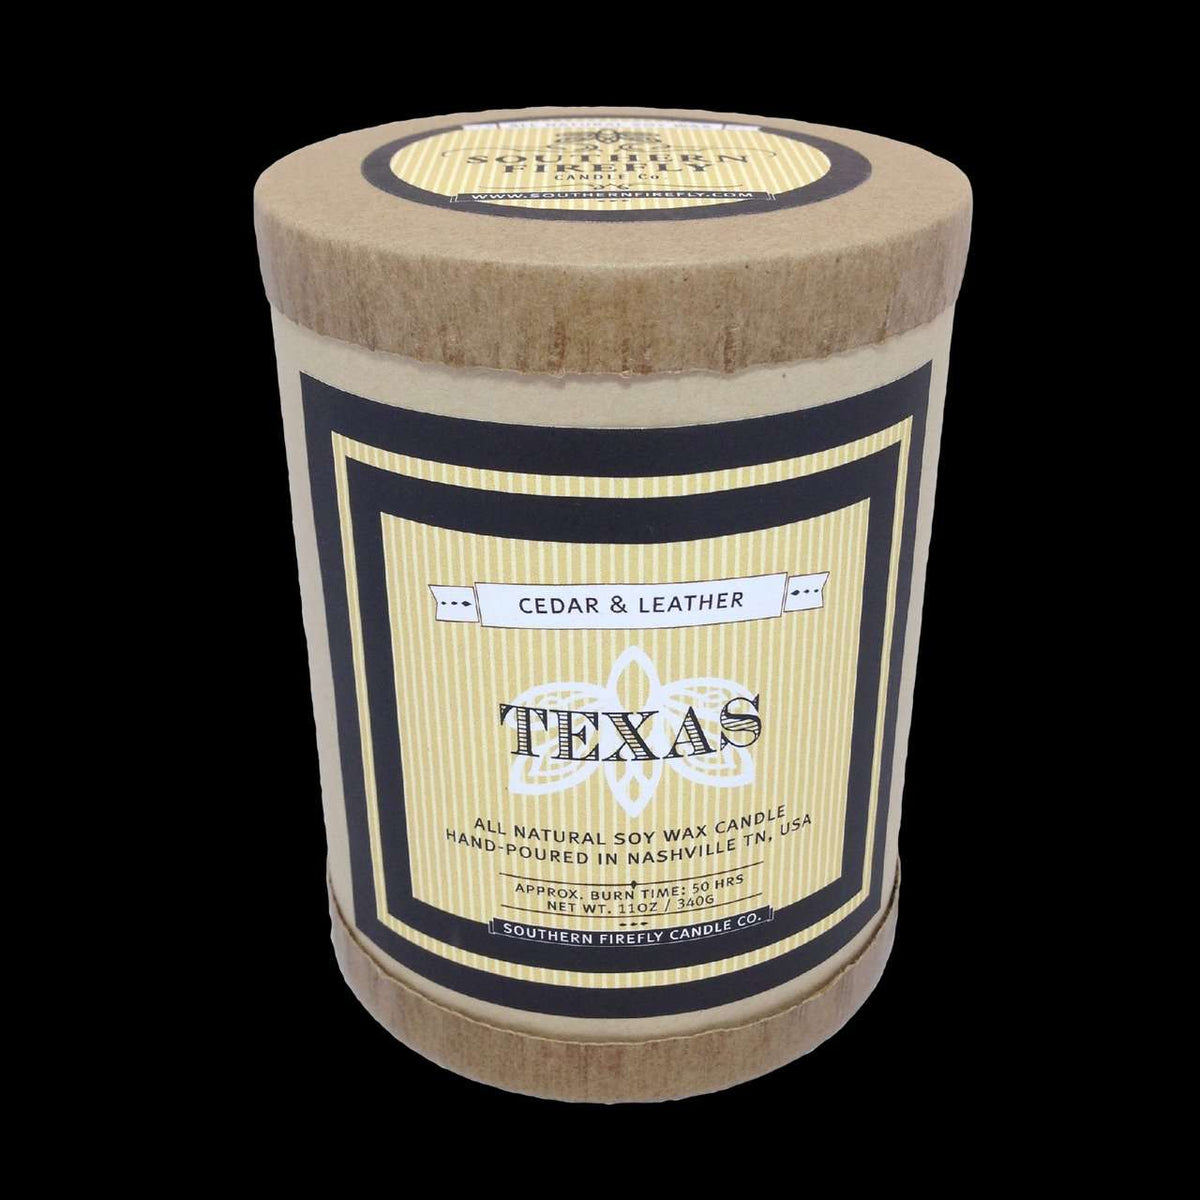 Texas Destination Series Soy Candle in Cedar and Leather Scent by Southern Firefly Candle Co. - Country Club Prep